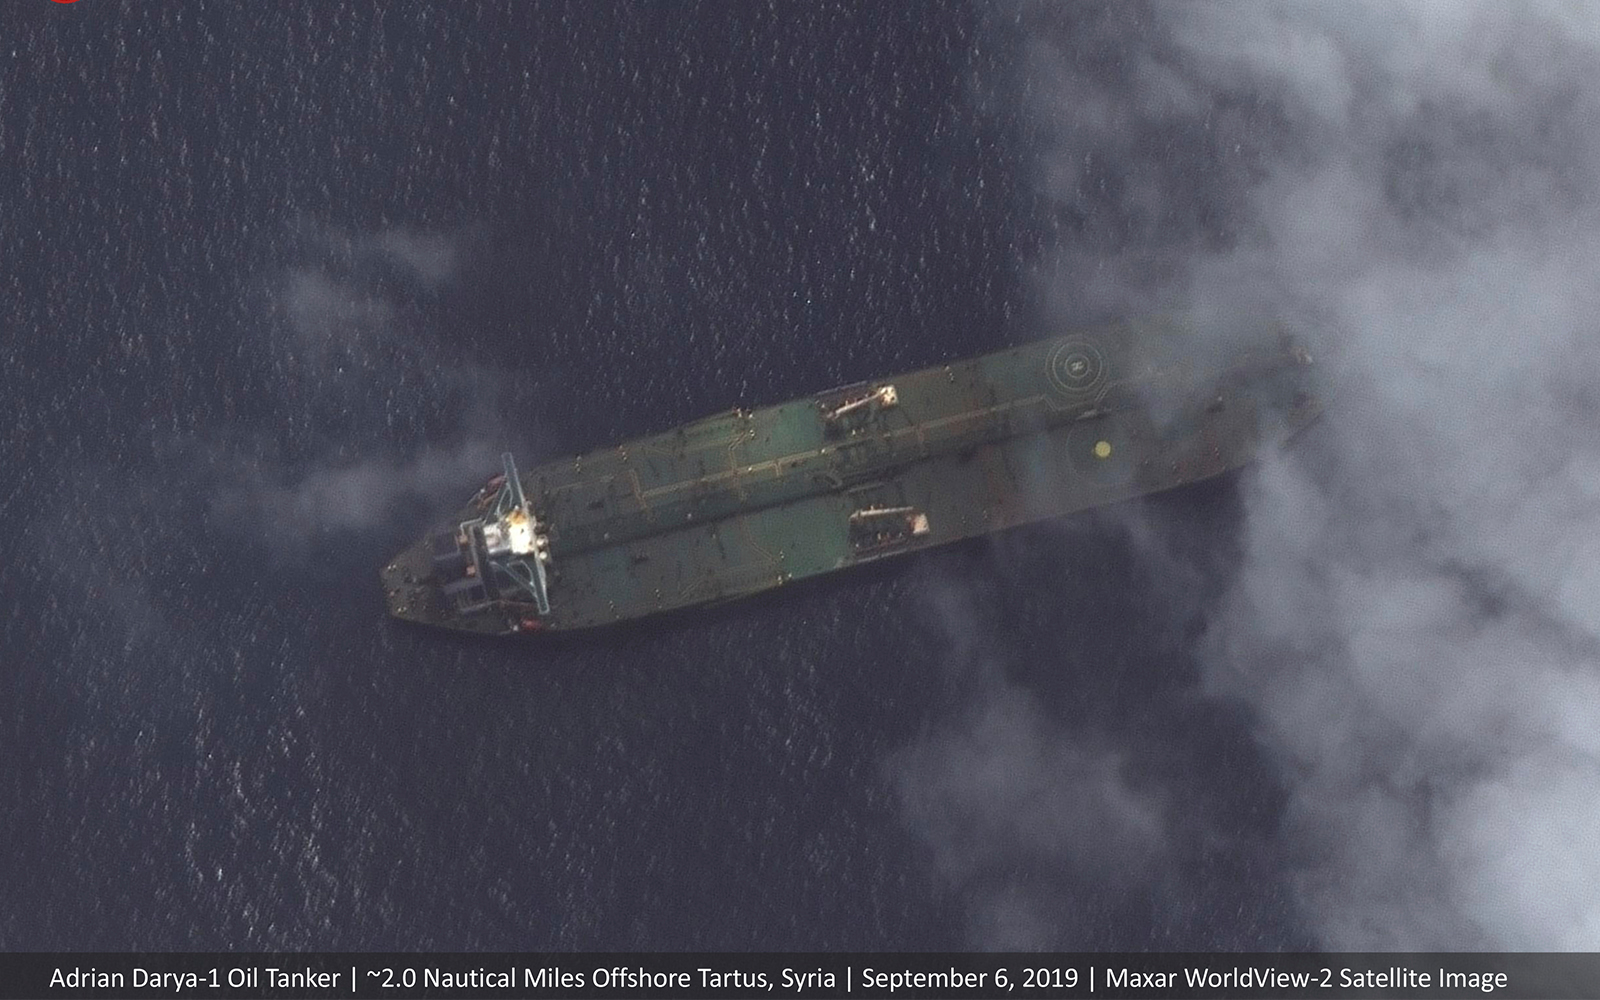 Satellite images show Iran oil tanker sought by US off Syrian coast | The Times of Israel